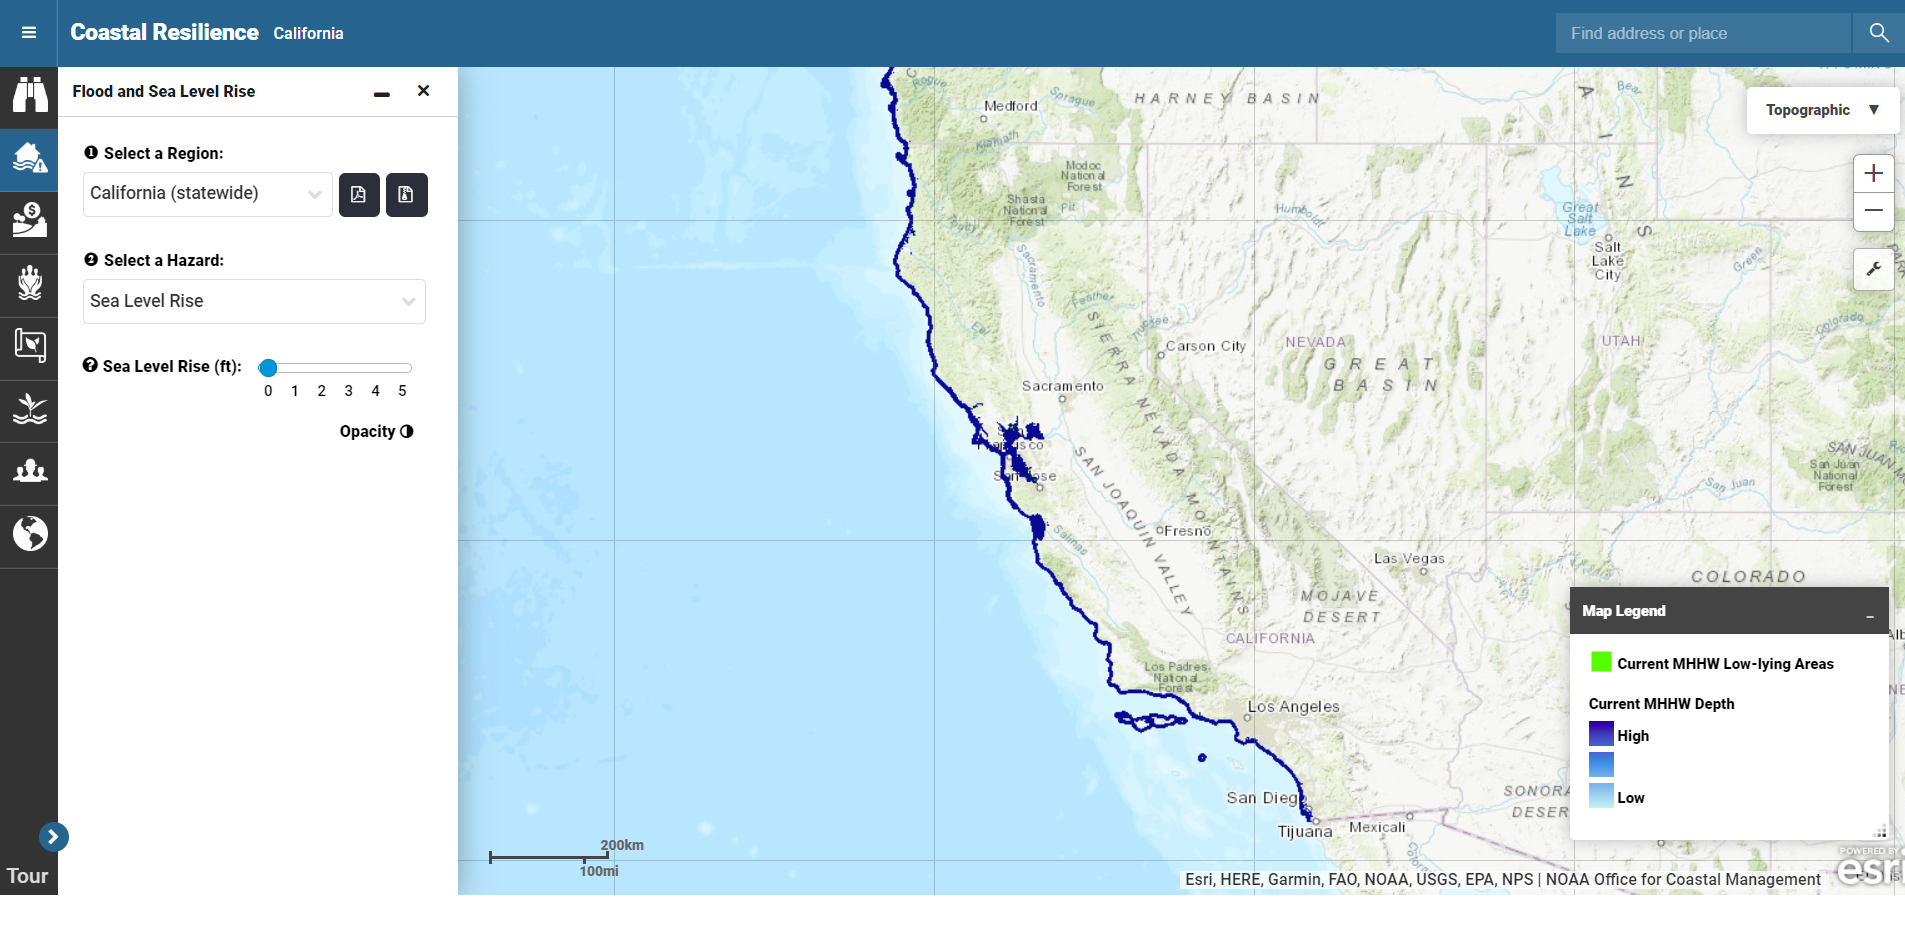 A screenshot of the tool, Coastal Resilience Mapping Portal, being used.